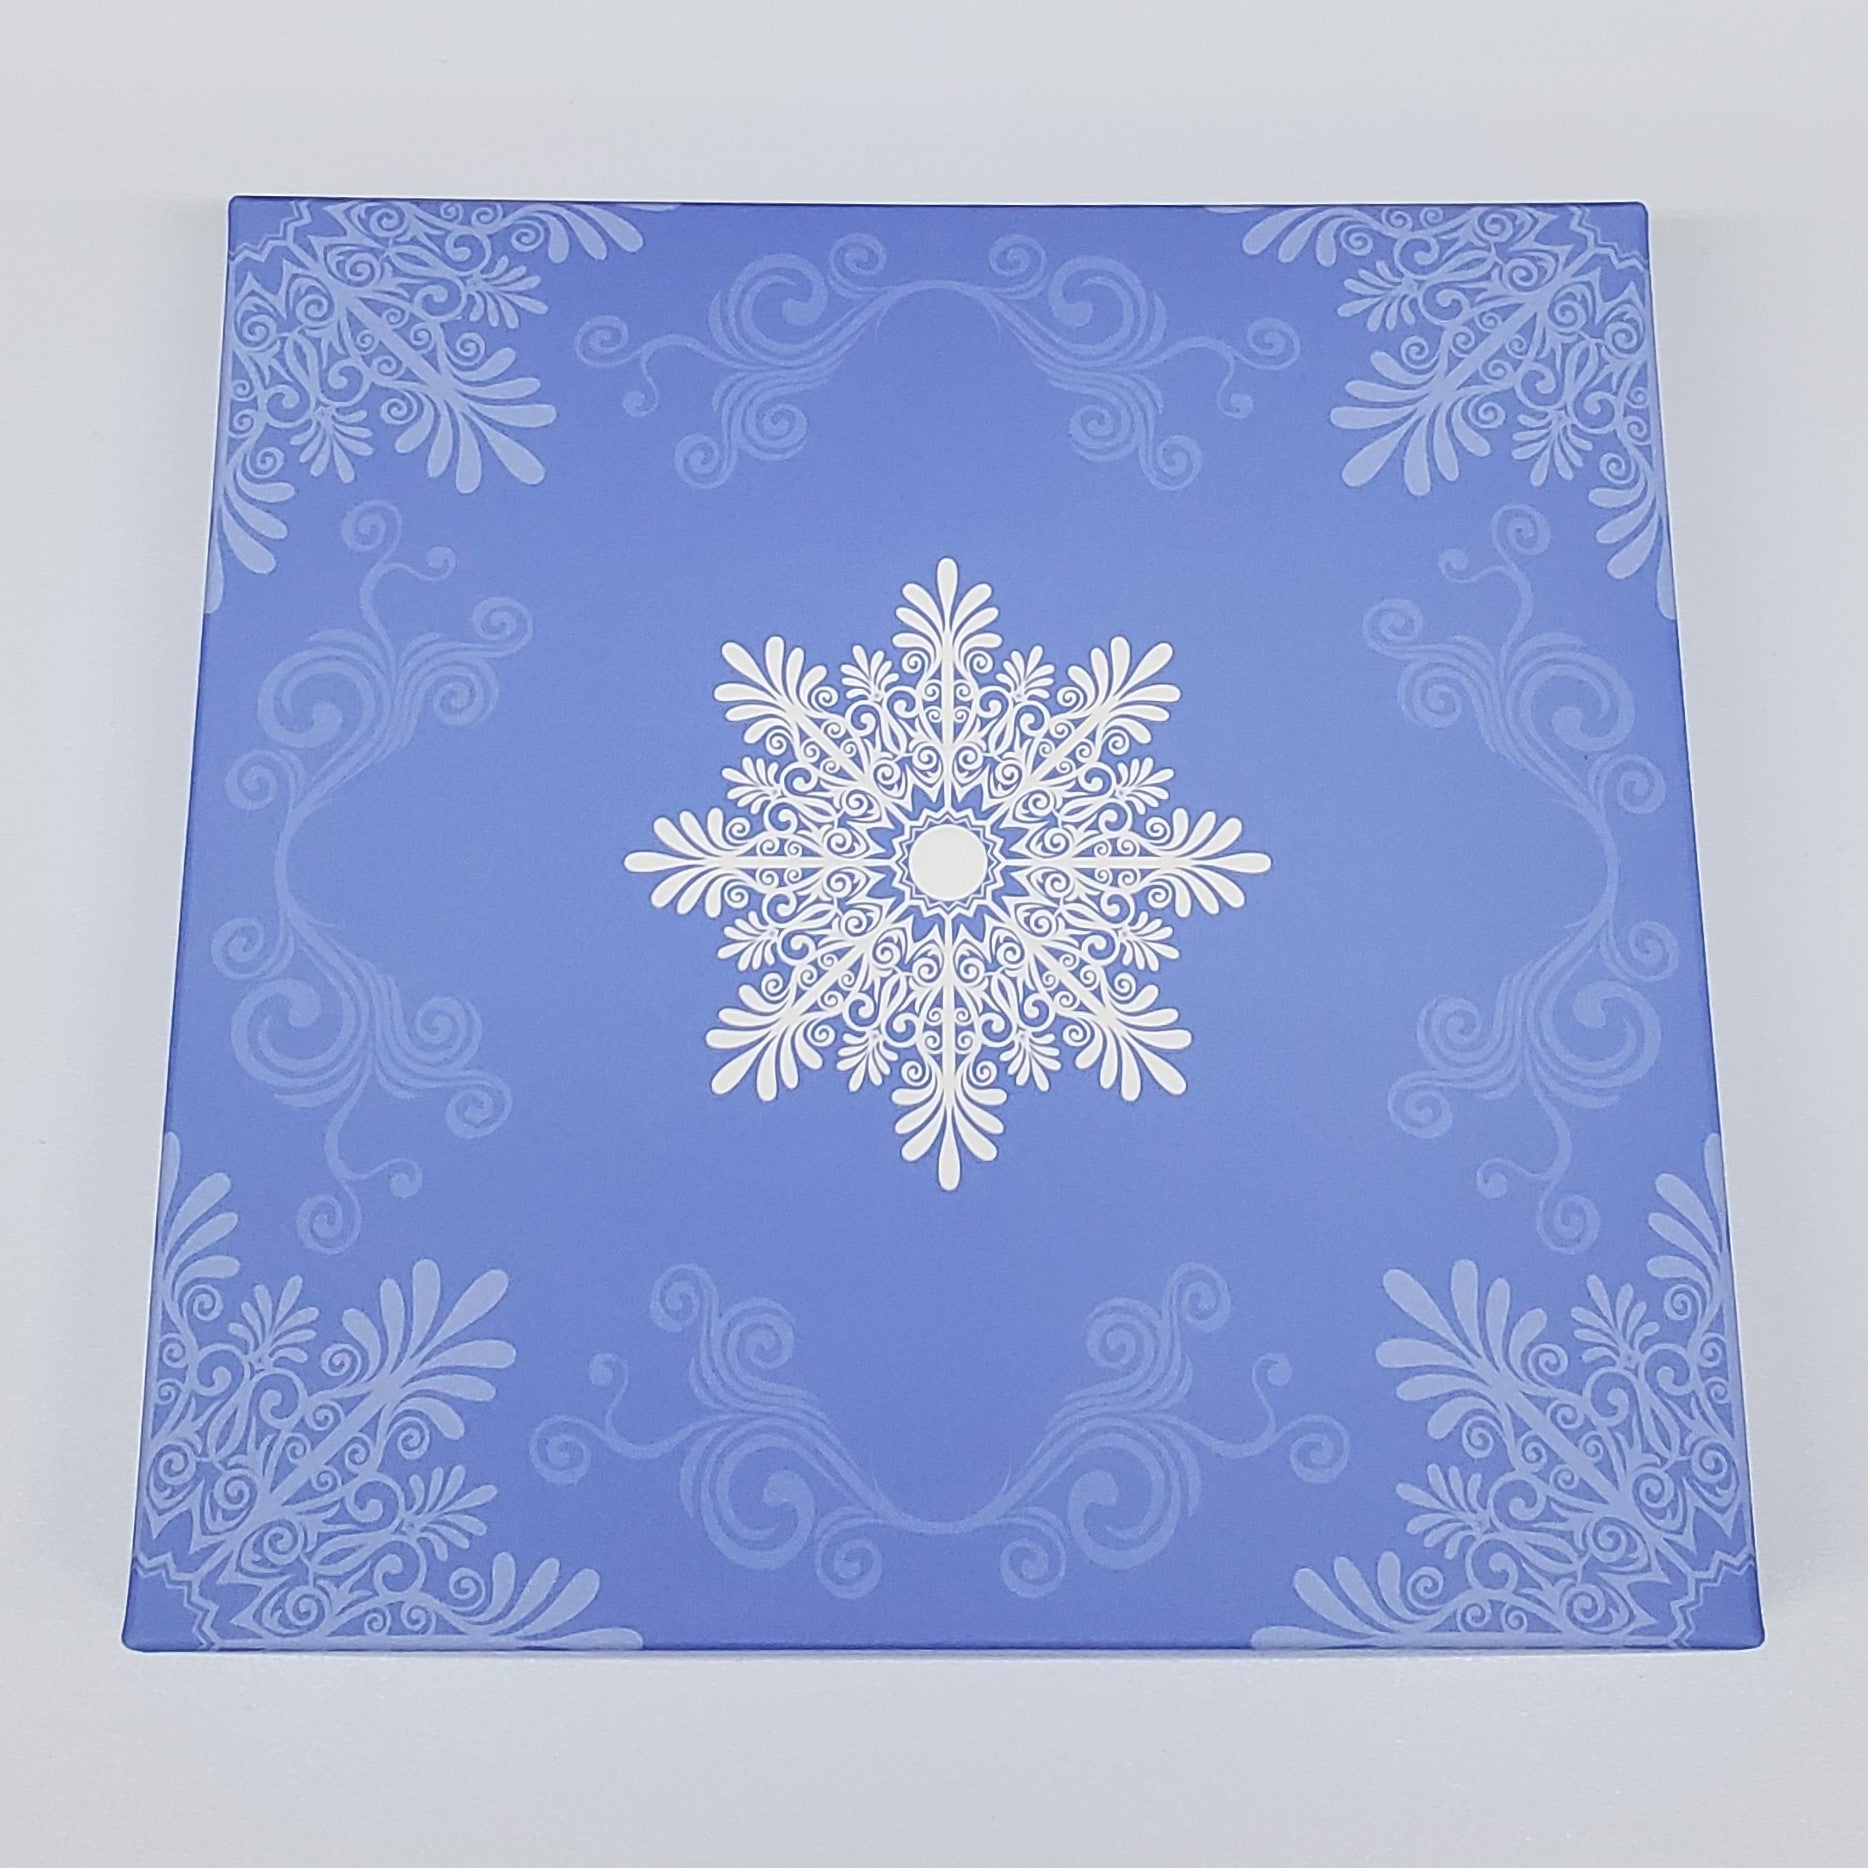 Snowflake Themed Box Cover for 16 Piece Holiday Assortment